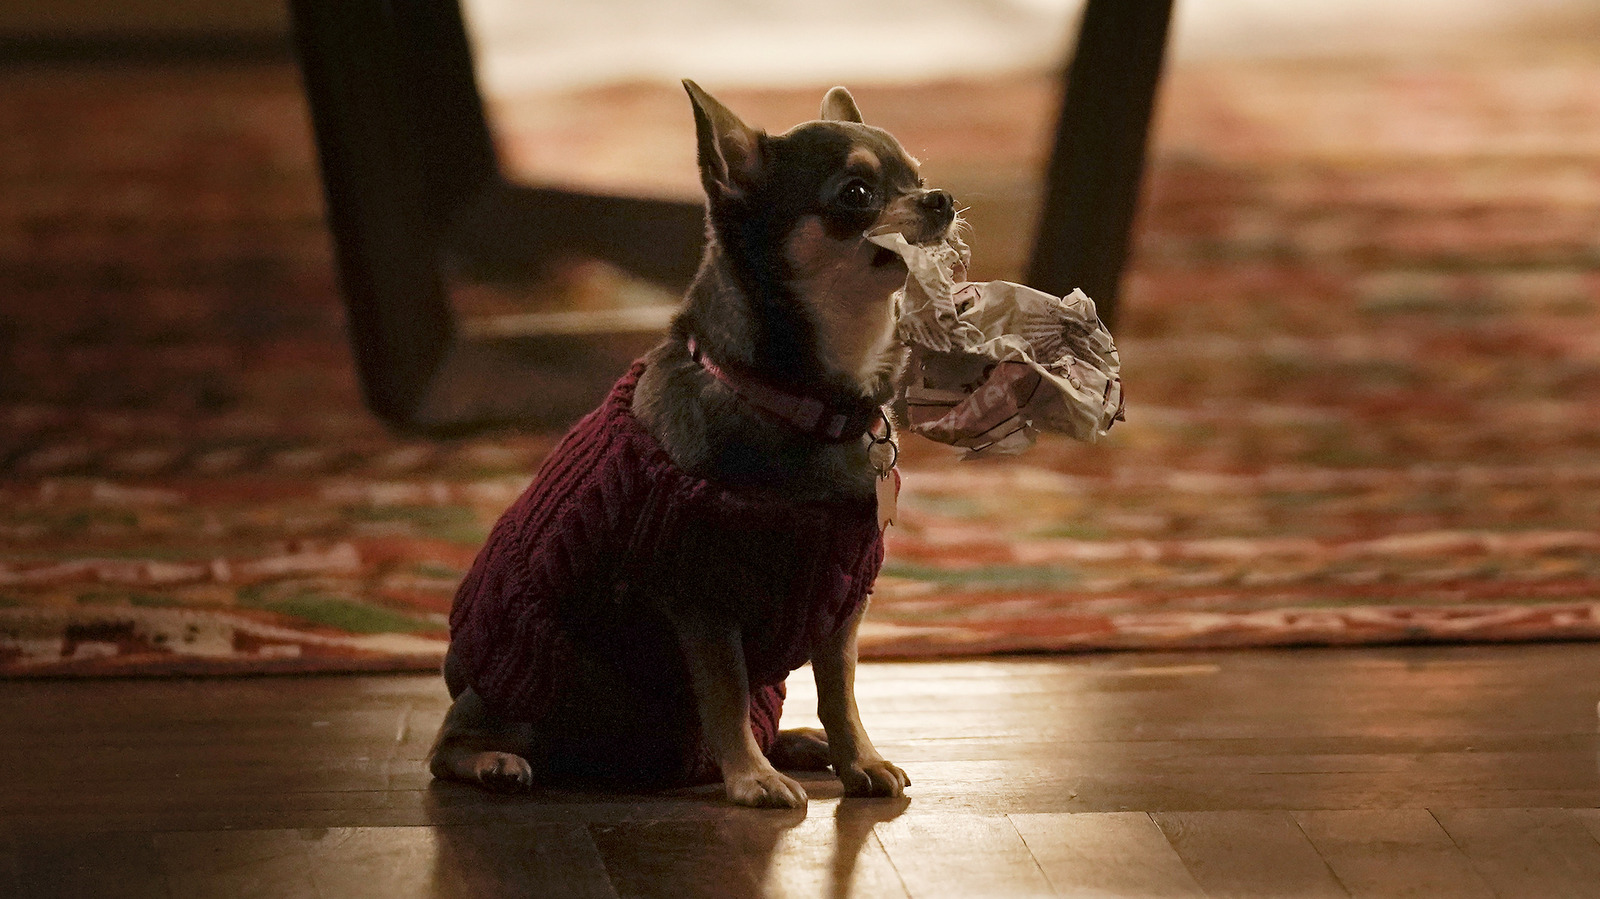 Will Trent Scene-Stealer Betty The Chihuahua Also Appeared In A Disney ...